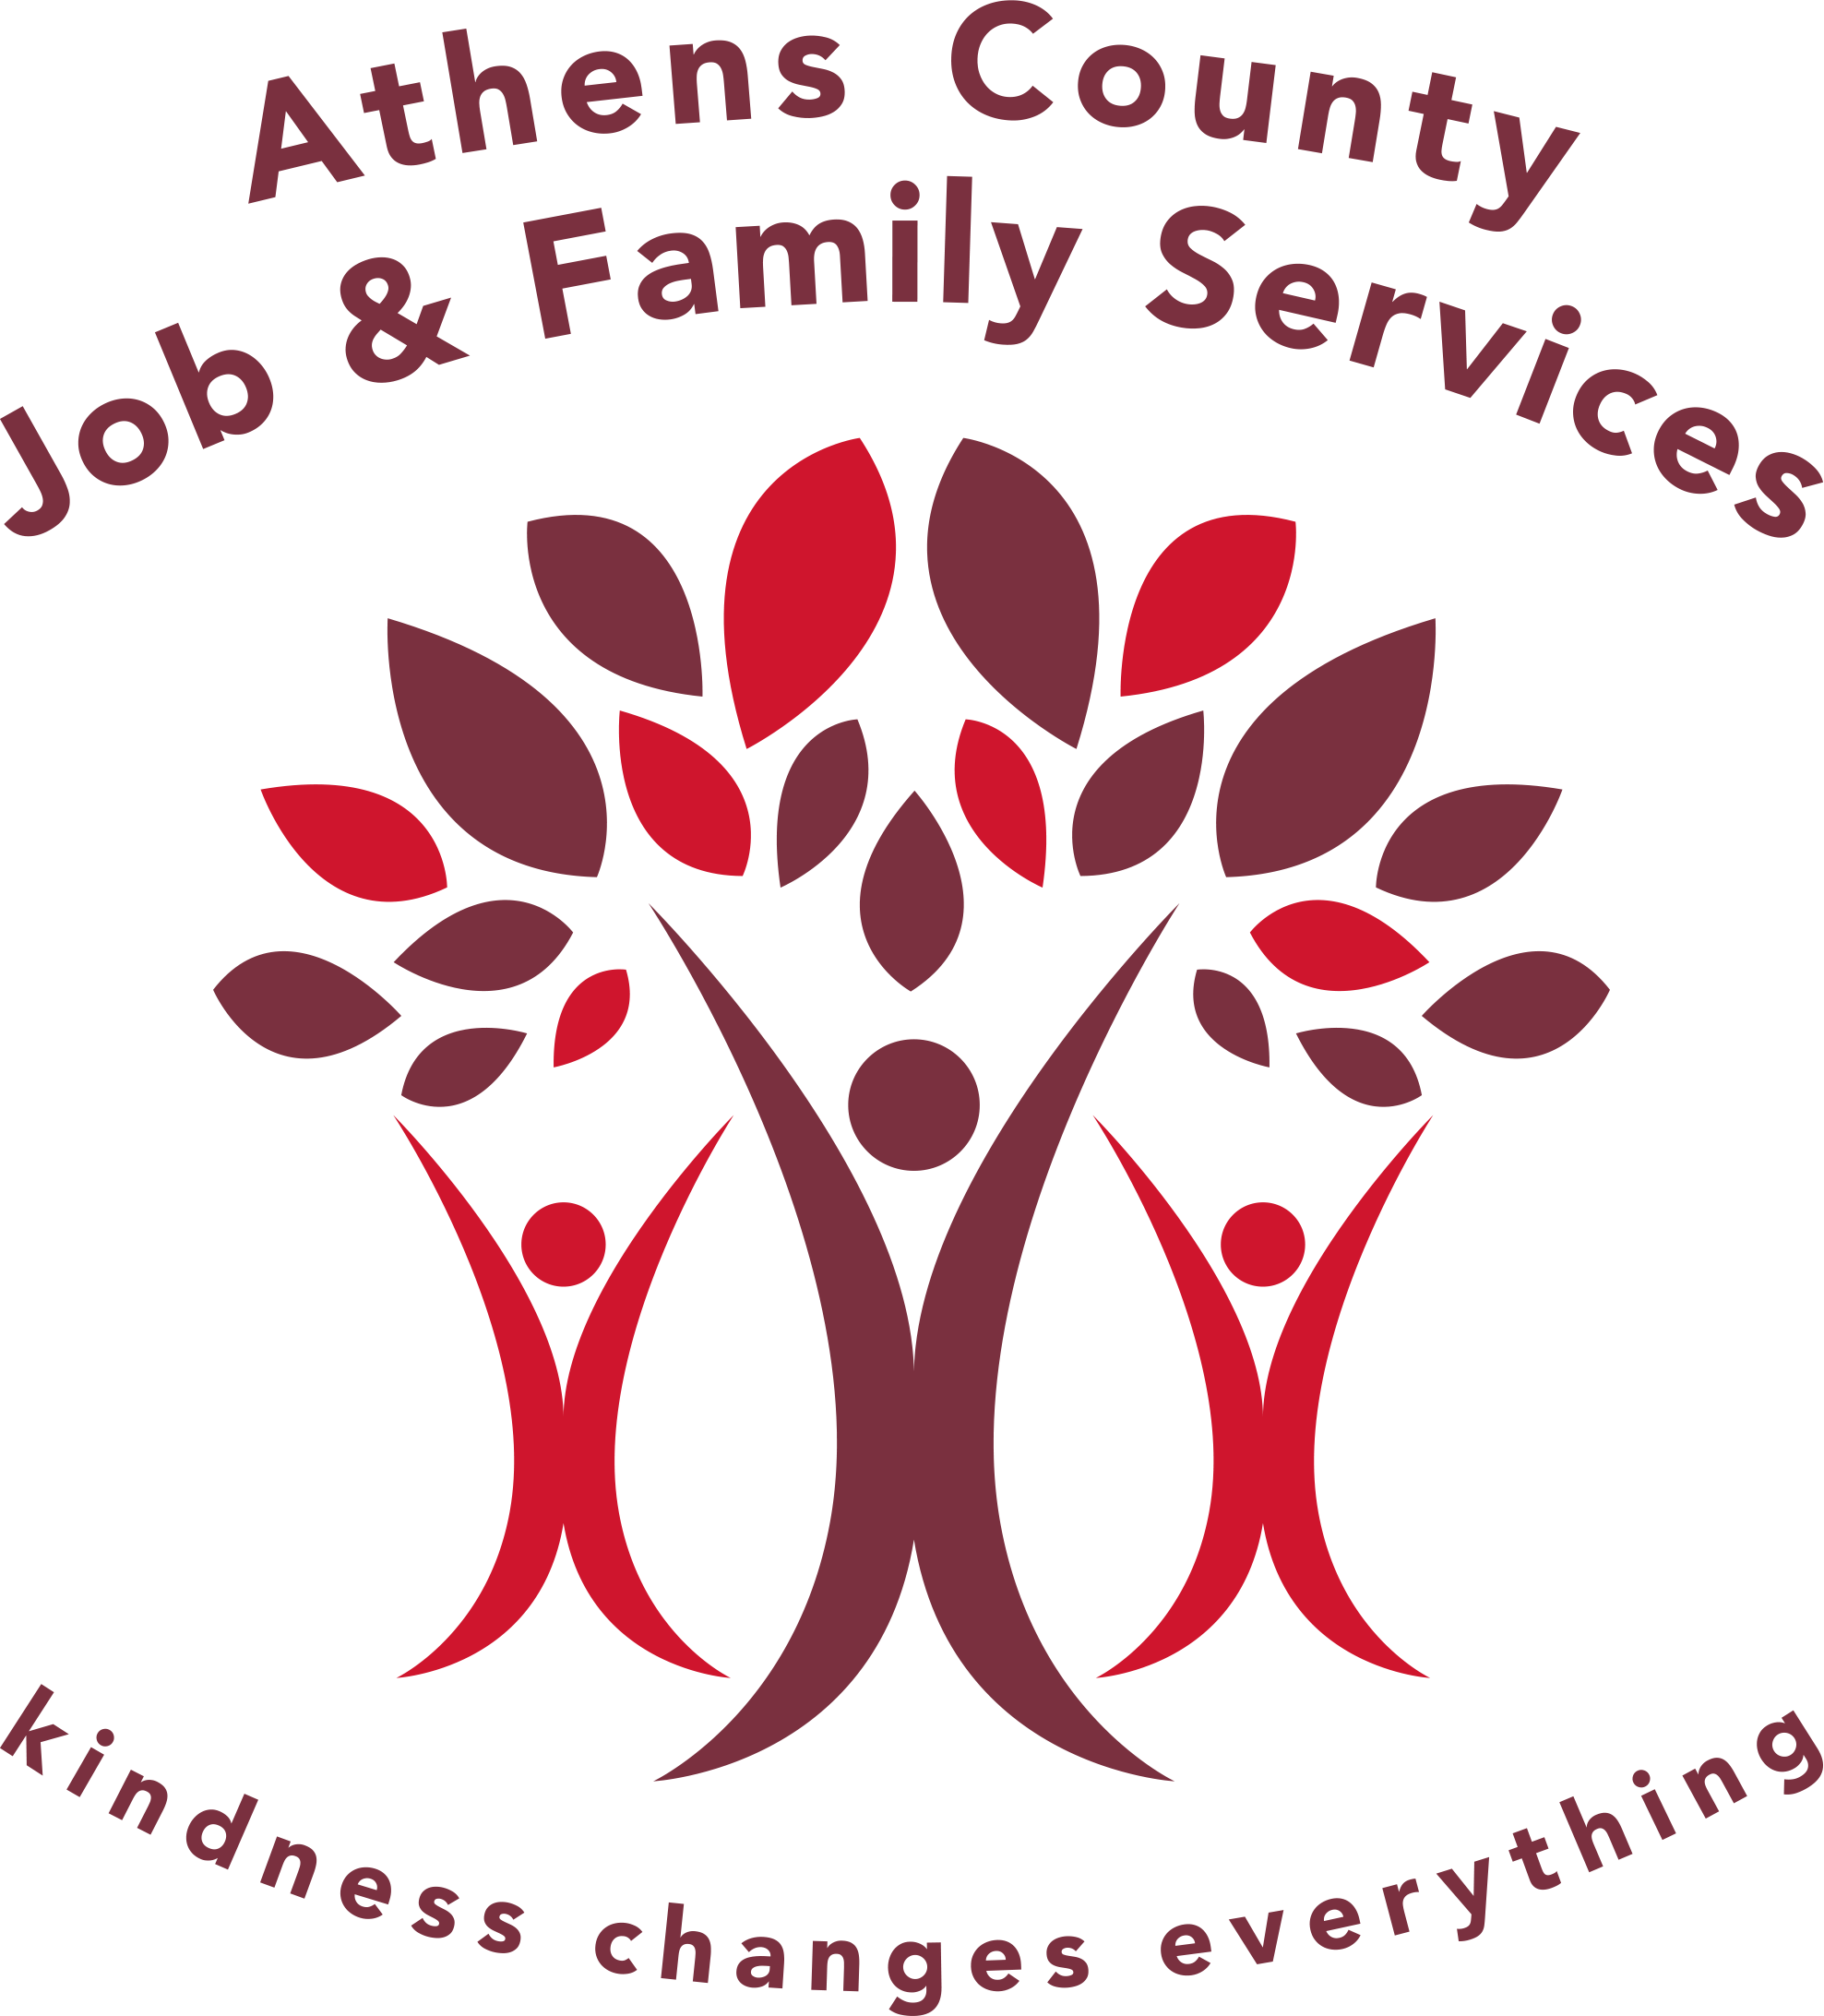 Athens County Department of Job and Family Services logo